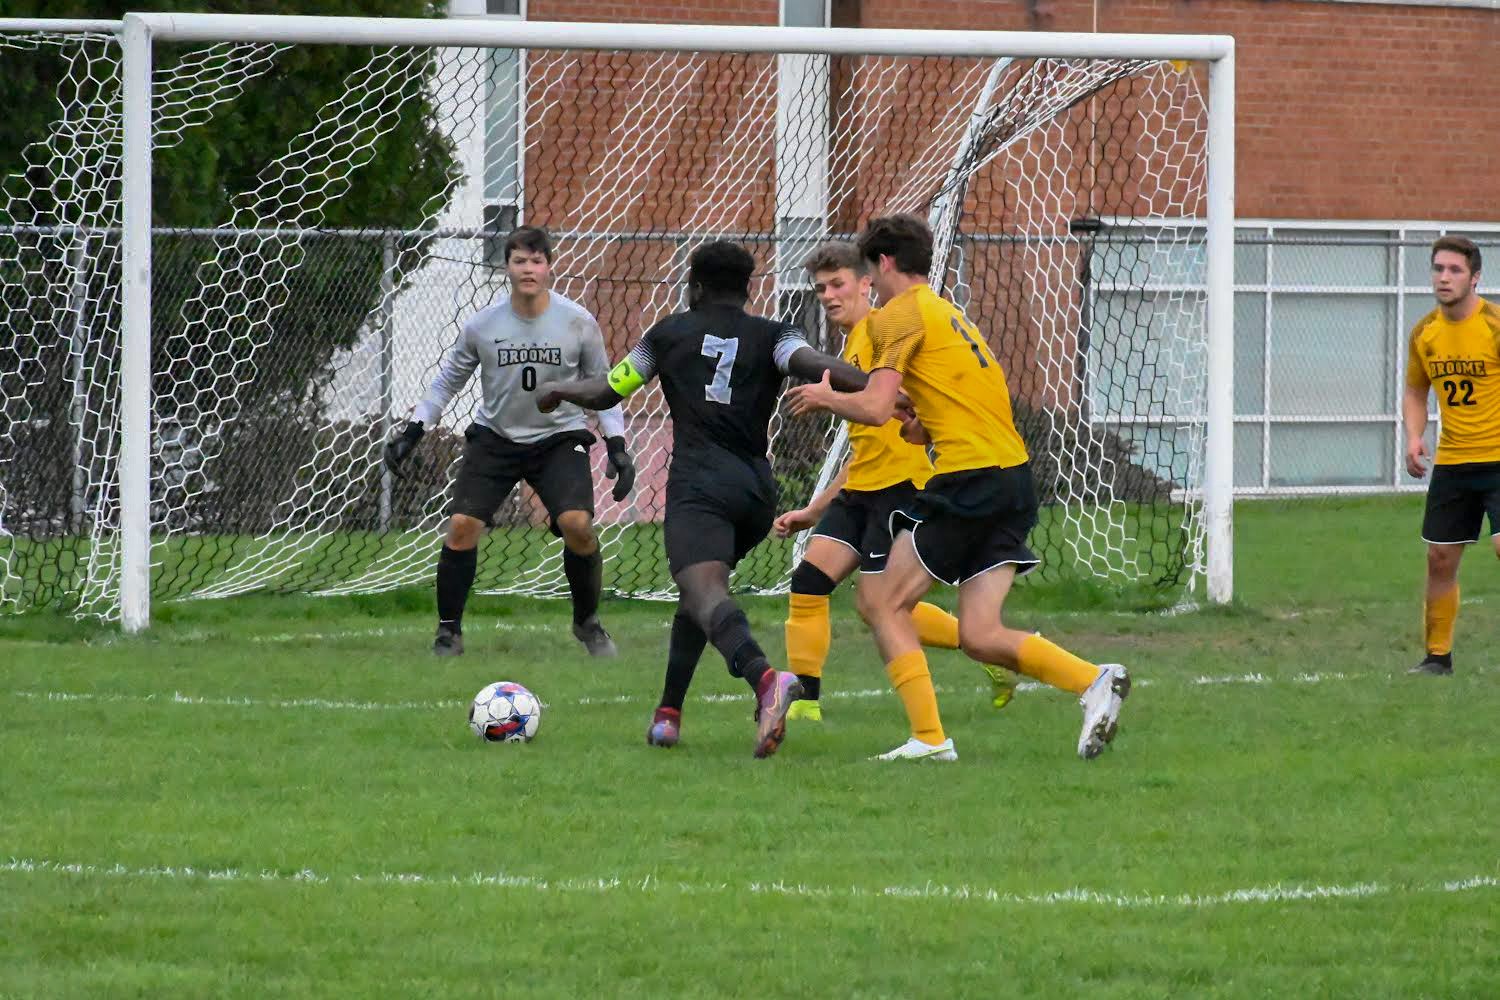 Men's Soccer Remains Undefeated in 8-0 Win Over SUNY Broome